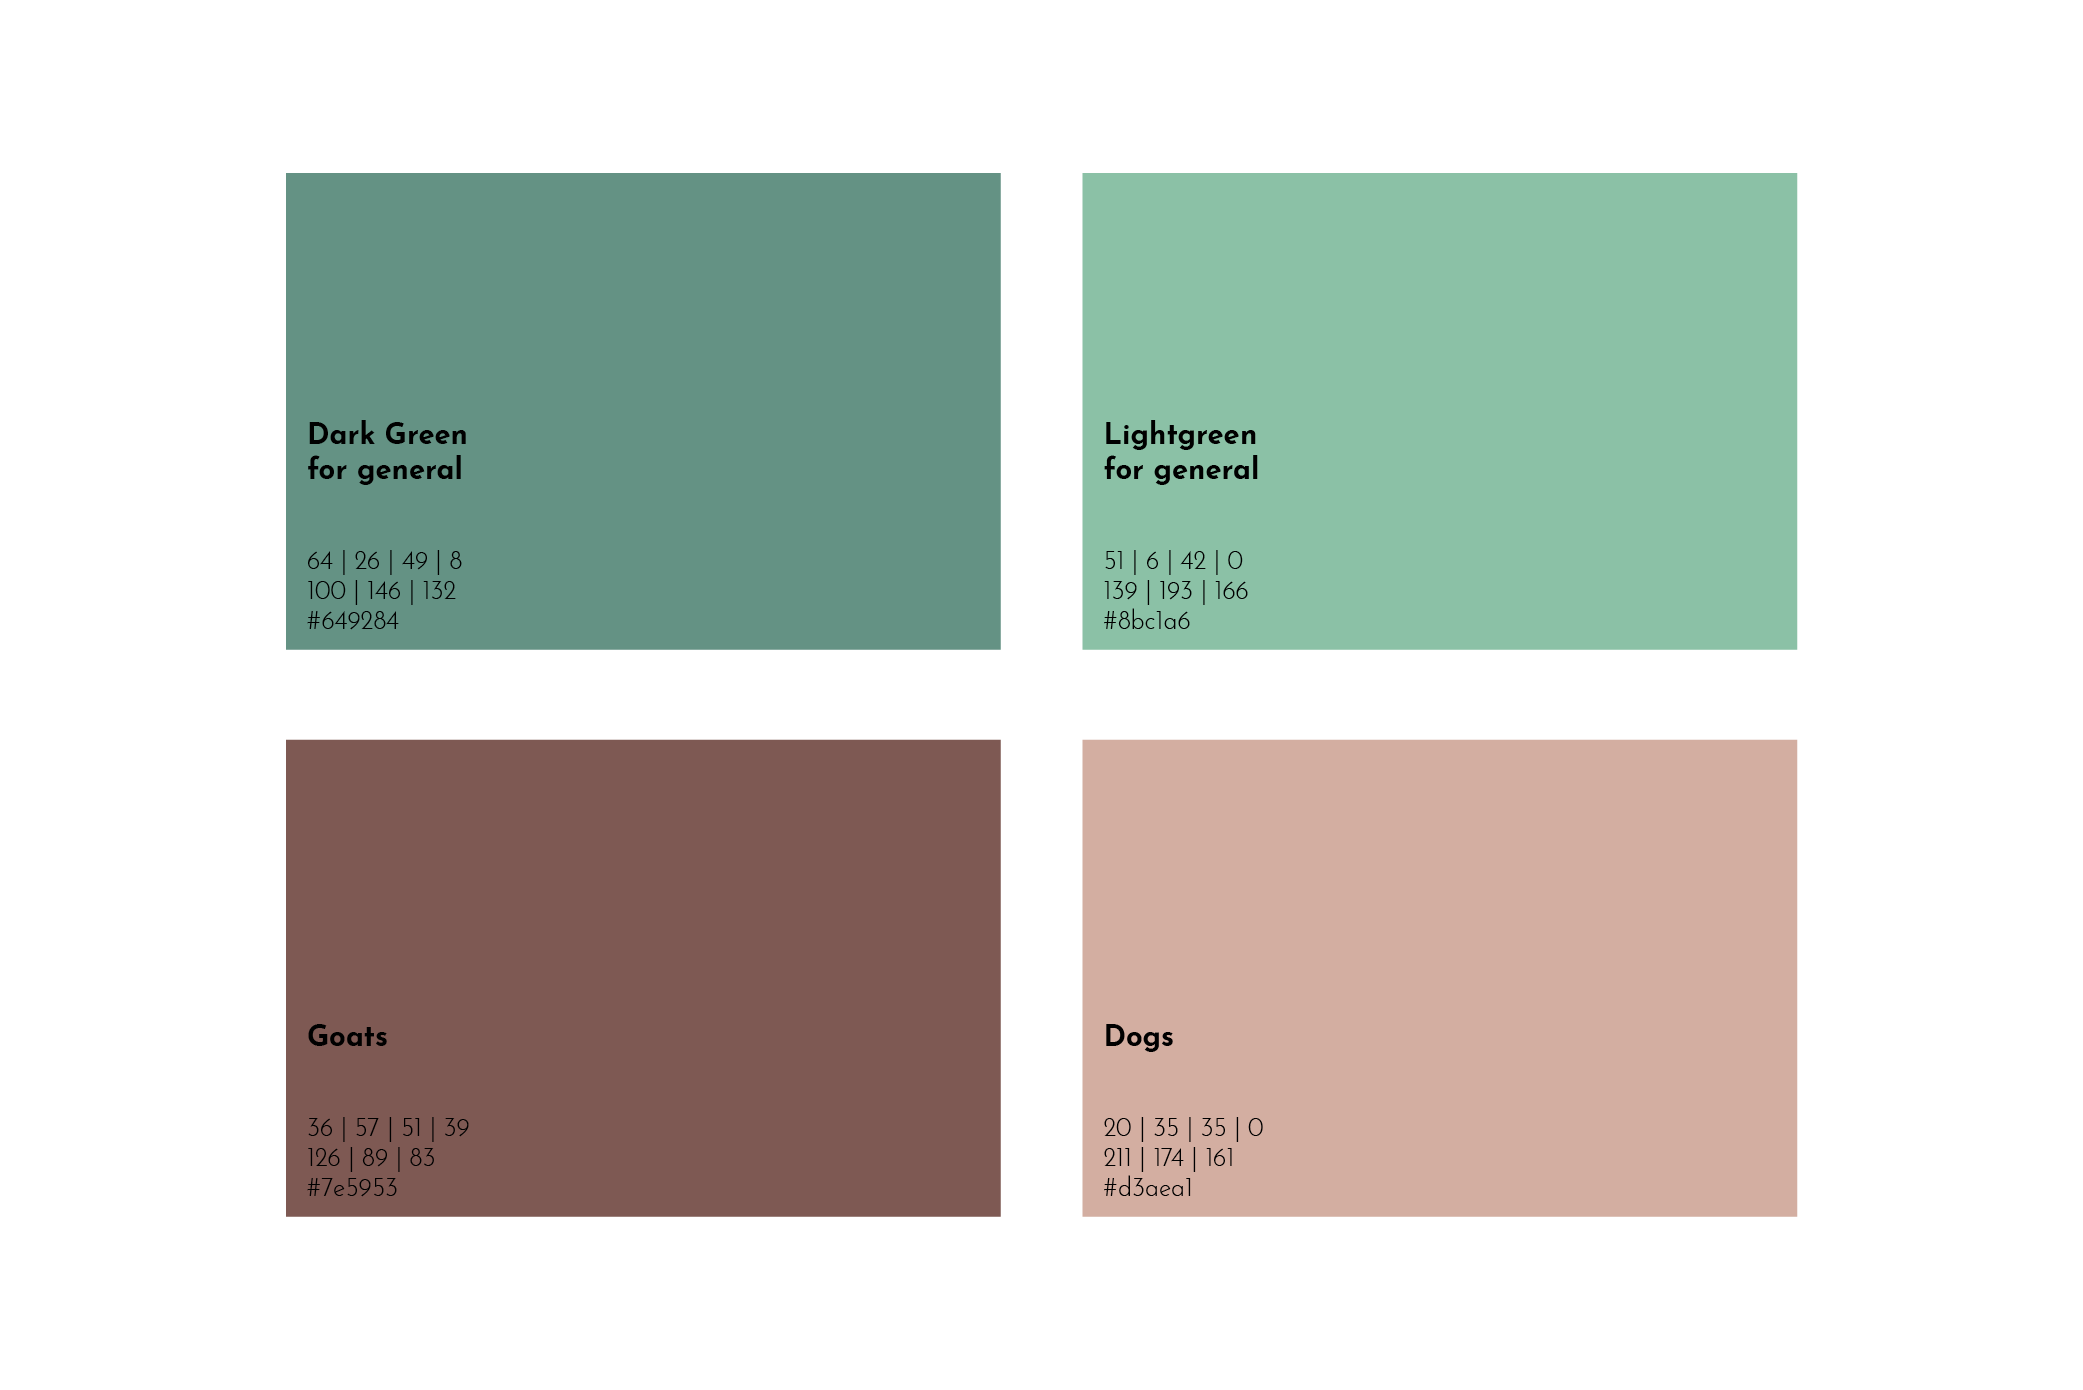 Brand Colors Inspired By Nature And The Animals' Fur Colors - Brand Identity Design By Corliss Design